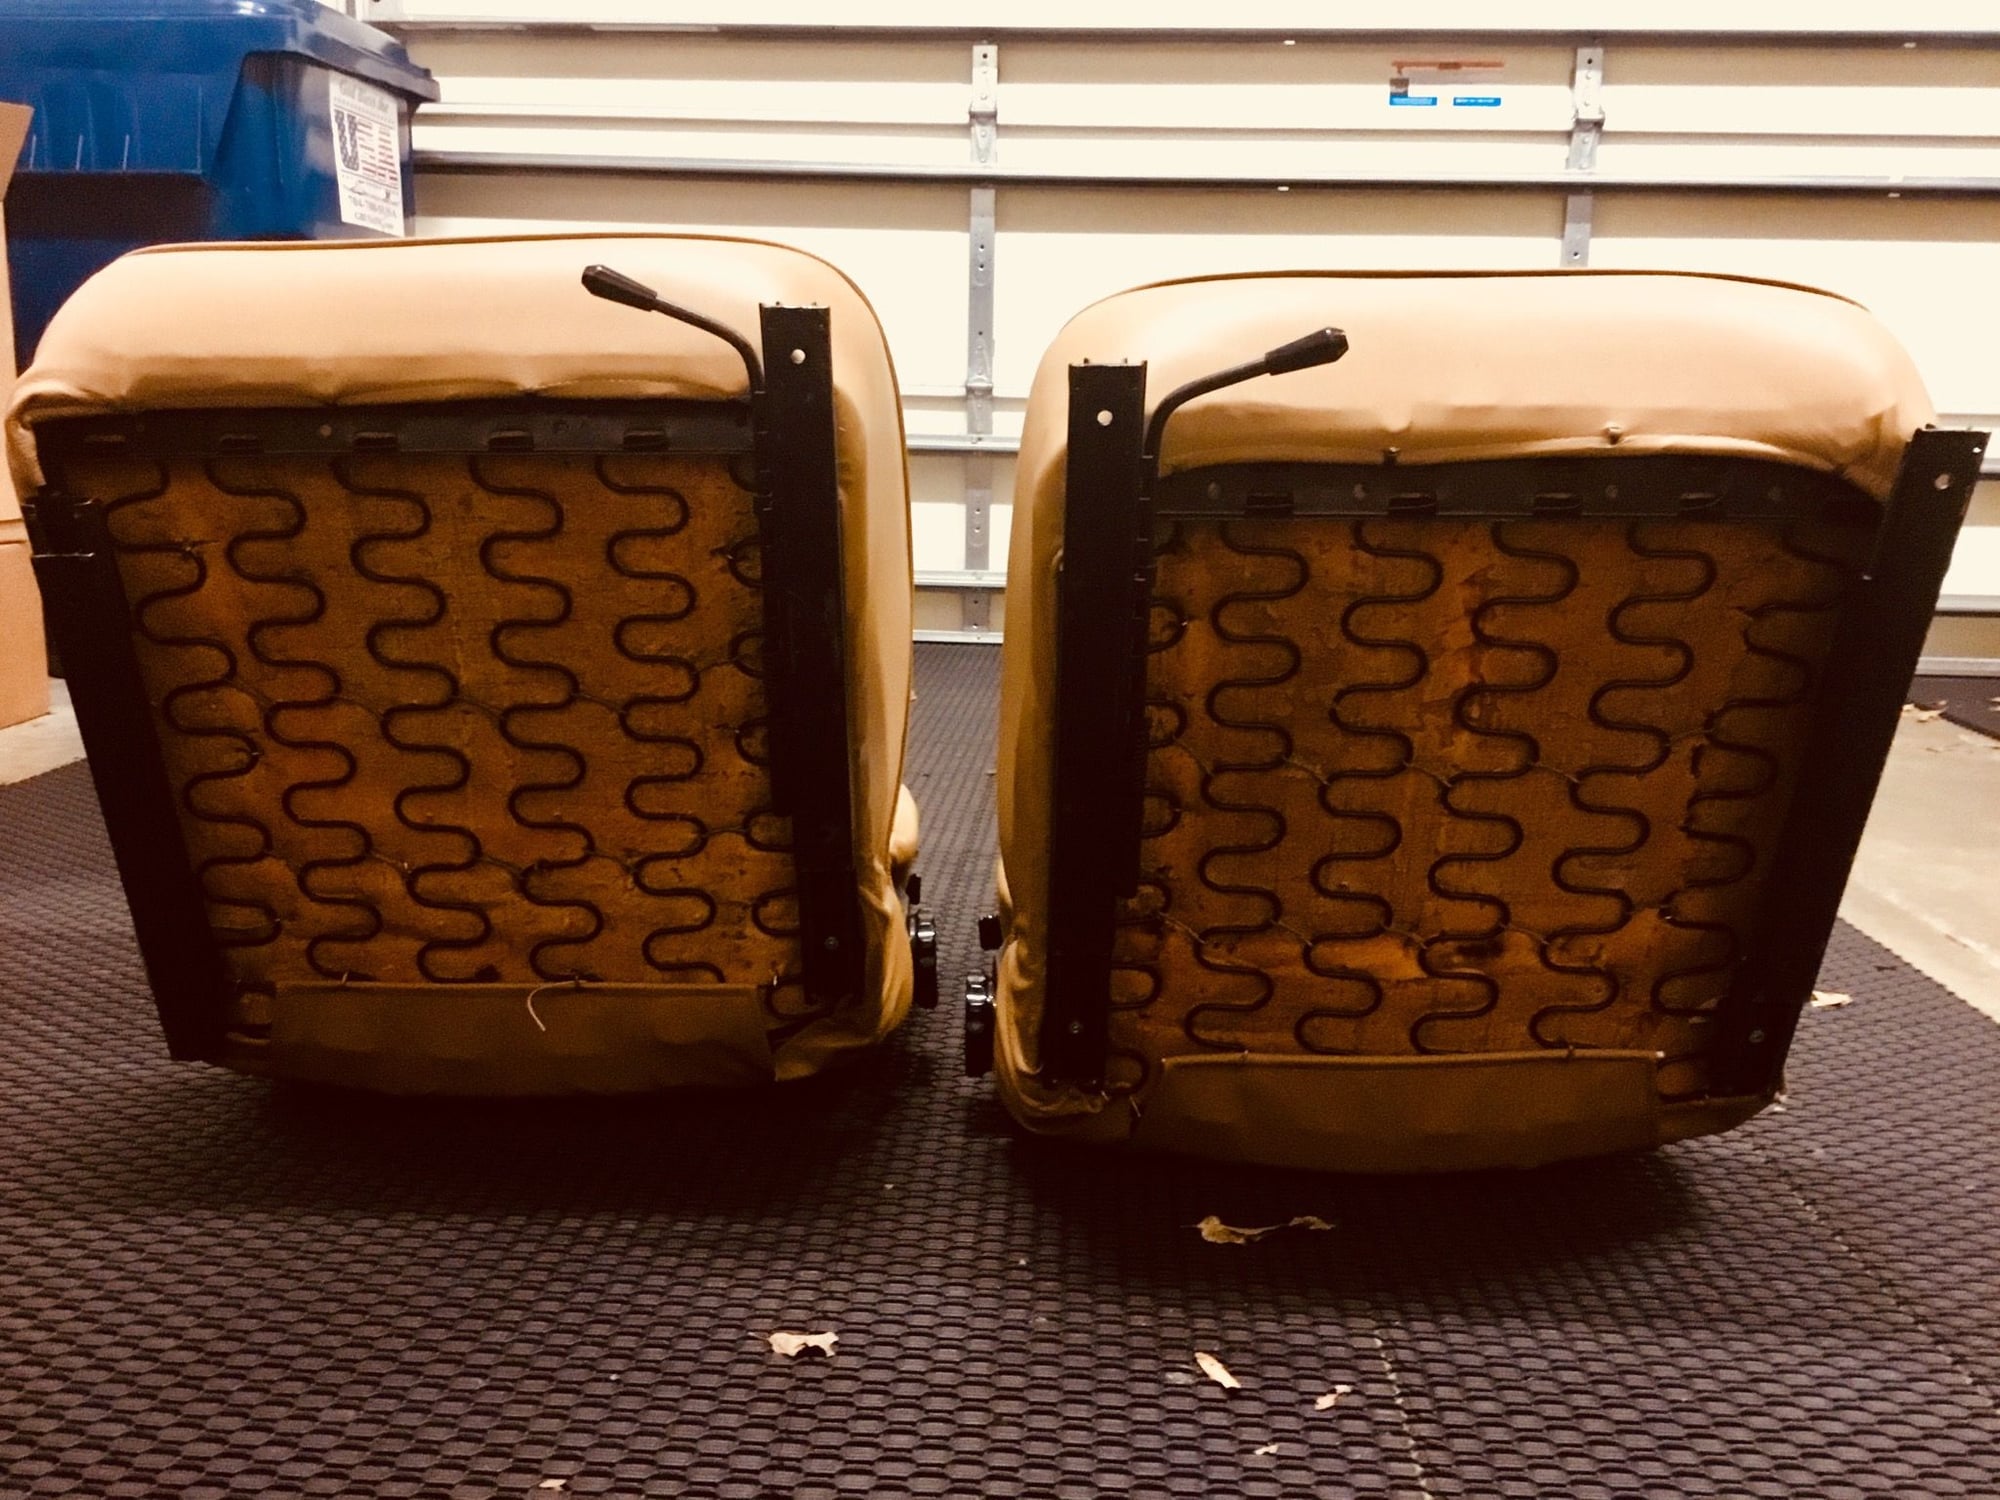 Interior/Upholstery - Porsche SC Seats - Used - 1974 to 1989 Porsche 911 - Marvin, NC 28173, United States